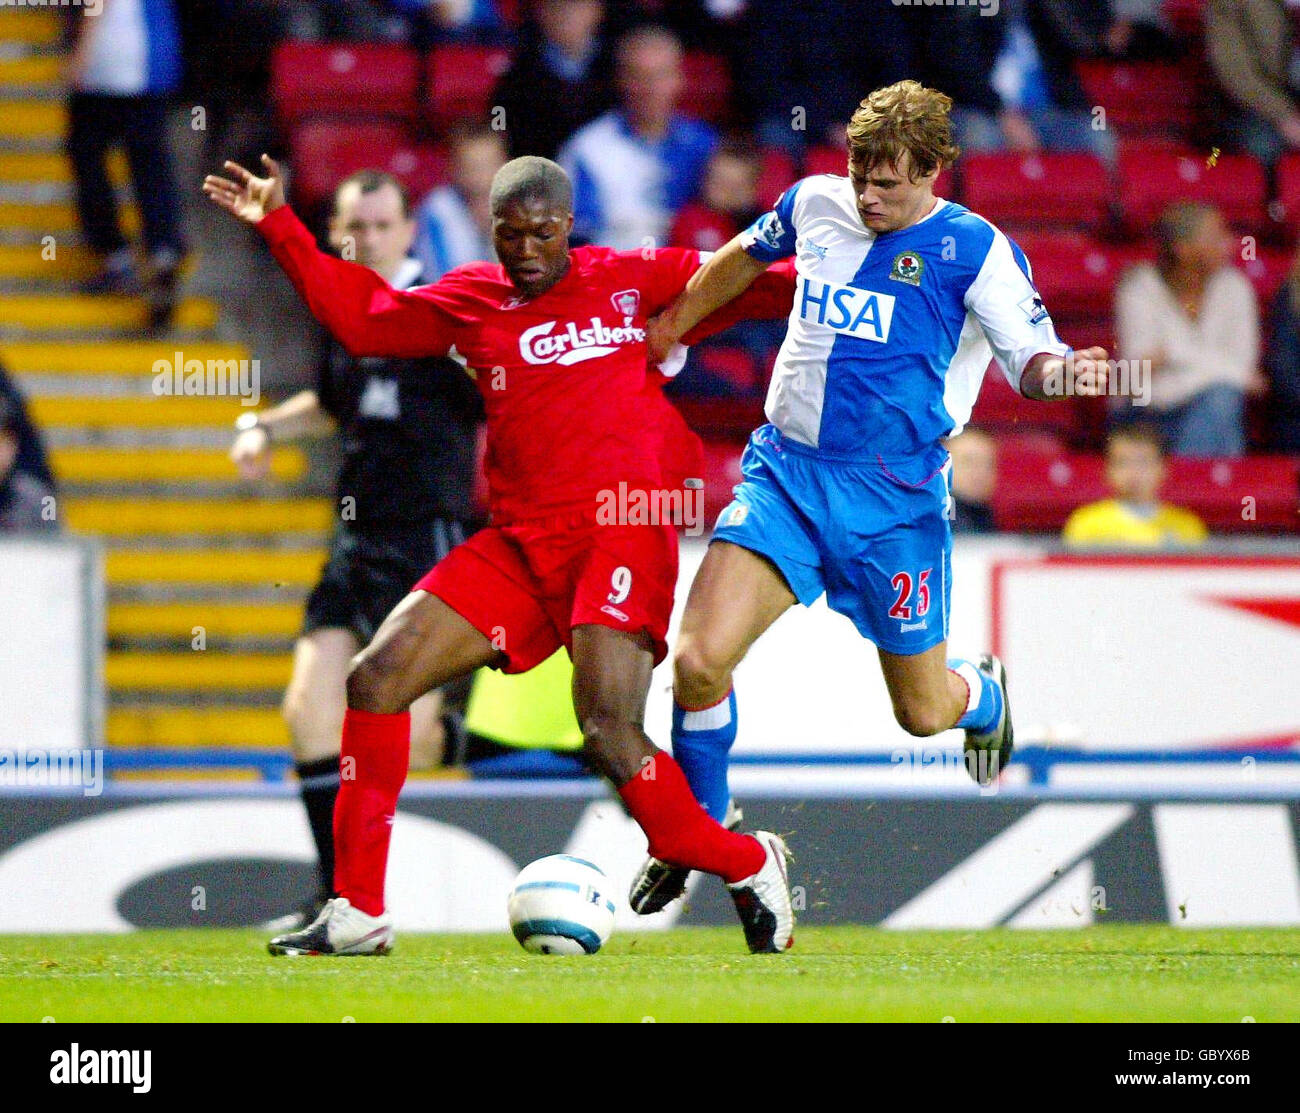 Liverpool's Djibril Cisse breaks his leg in a challenge with Blackburn  Rovers's James McEveley Stock Photo - Alamy